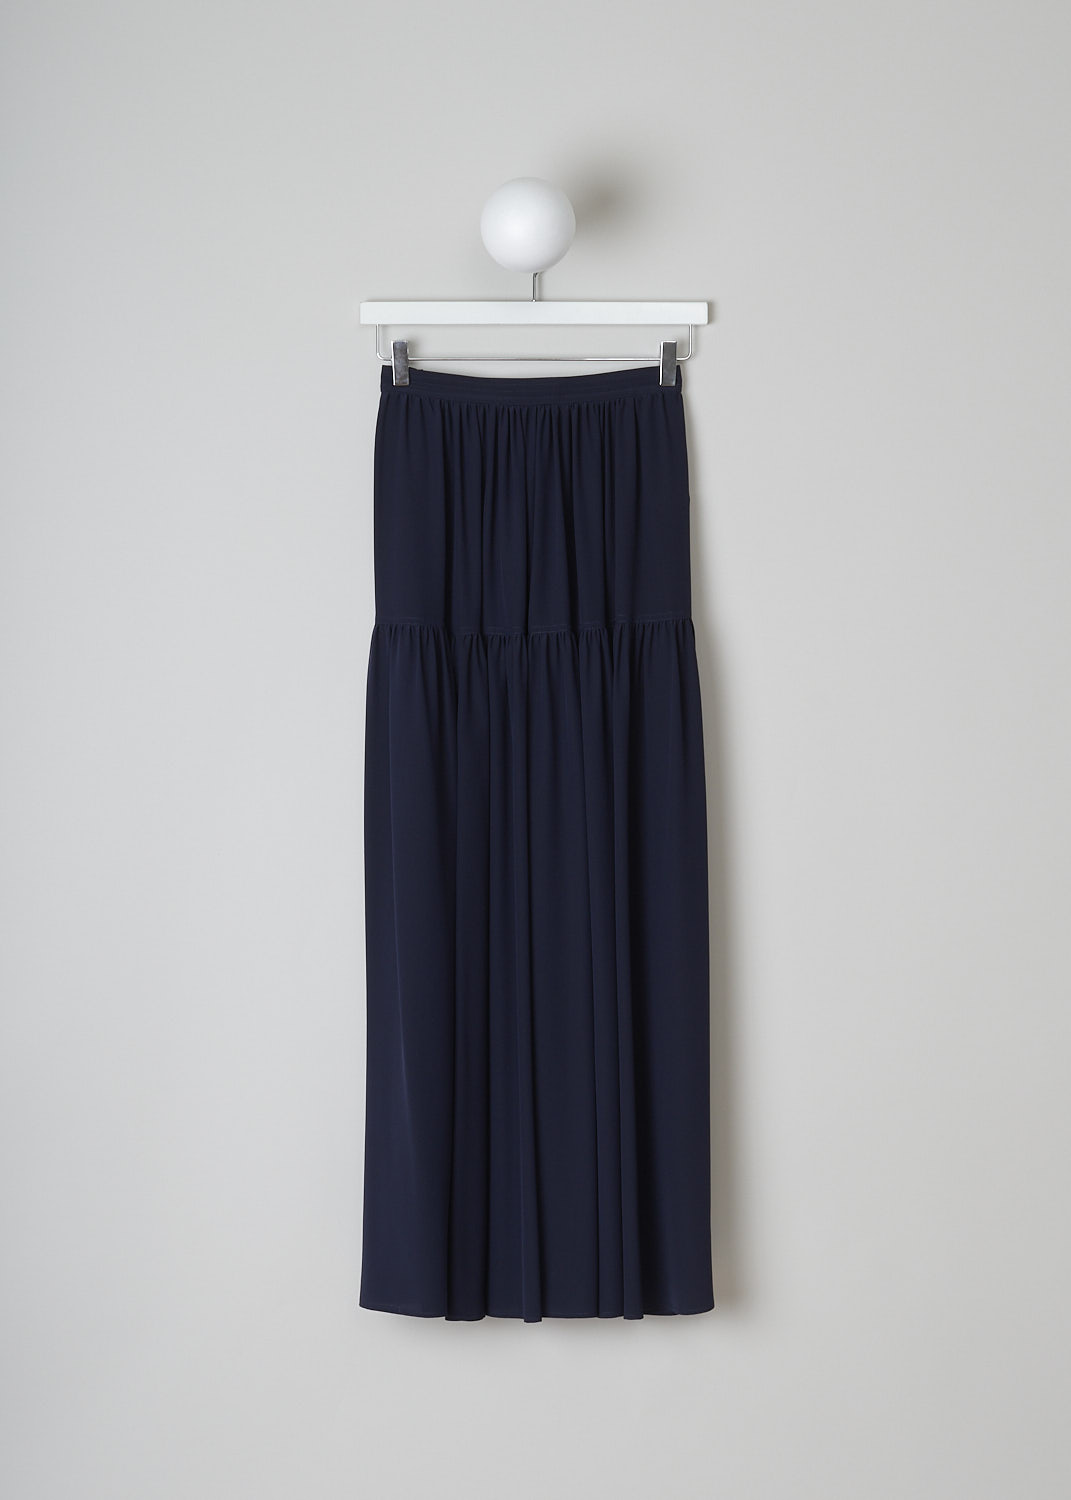 CHLOÃ‰, TIERED INK NAVY SKIRT, CHC22UJU030044C34_IN_NAVY, Blue, Back, This tiered Ink Navy midi skirt has a concealed side zip and inseam pockets. The skirt had a straight hemline.  
